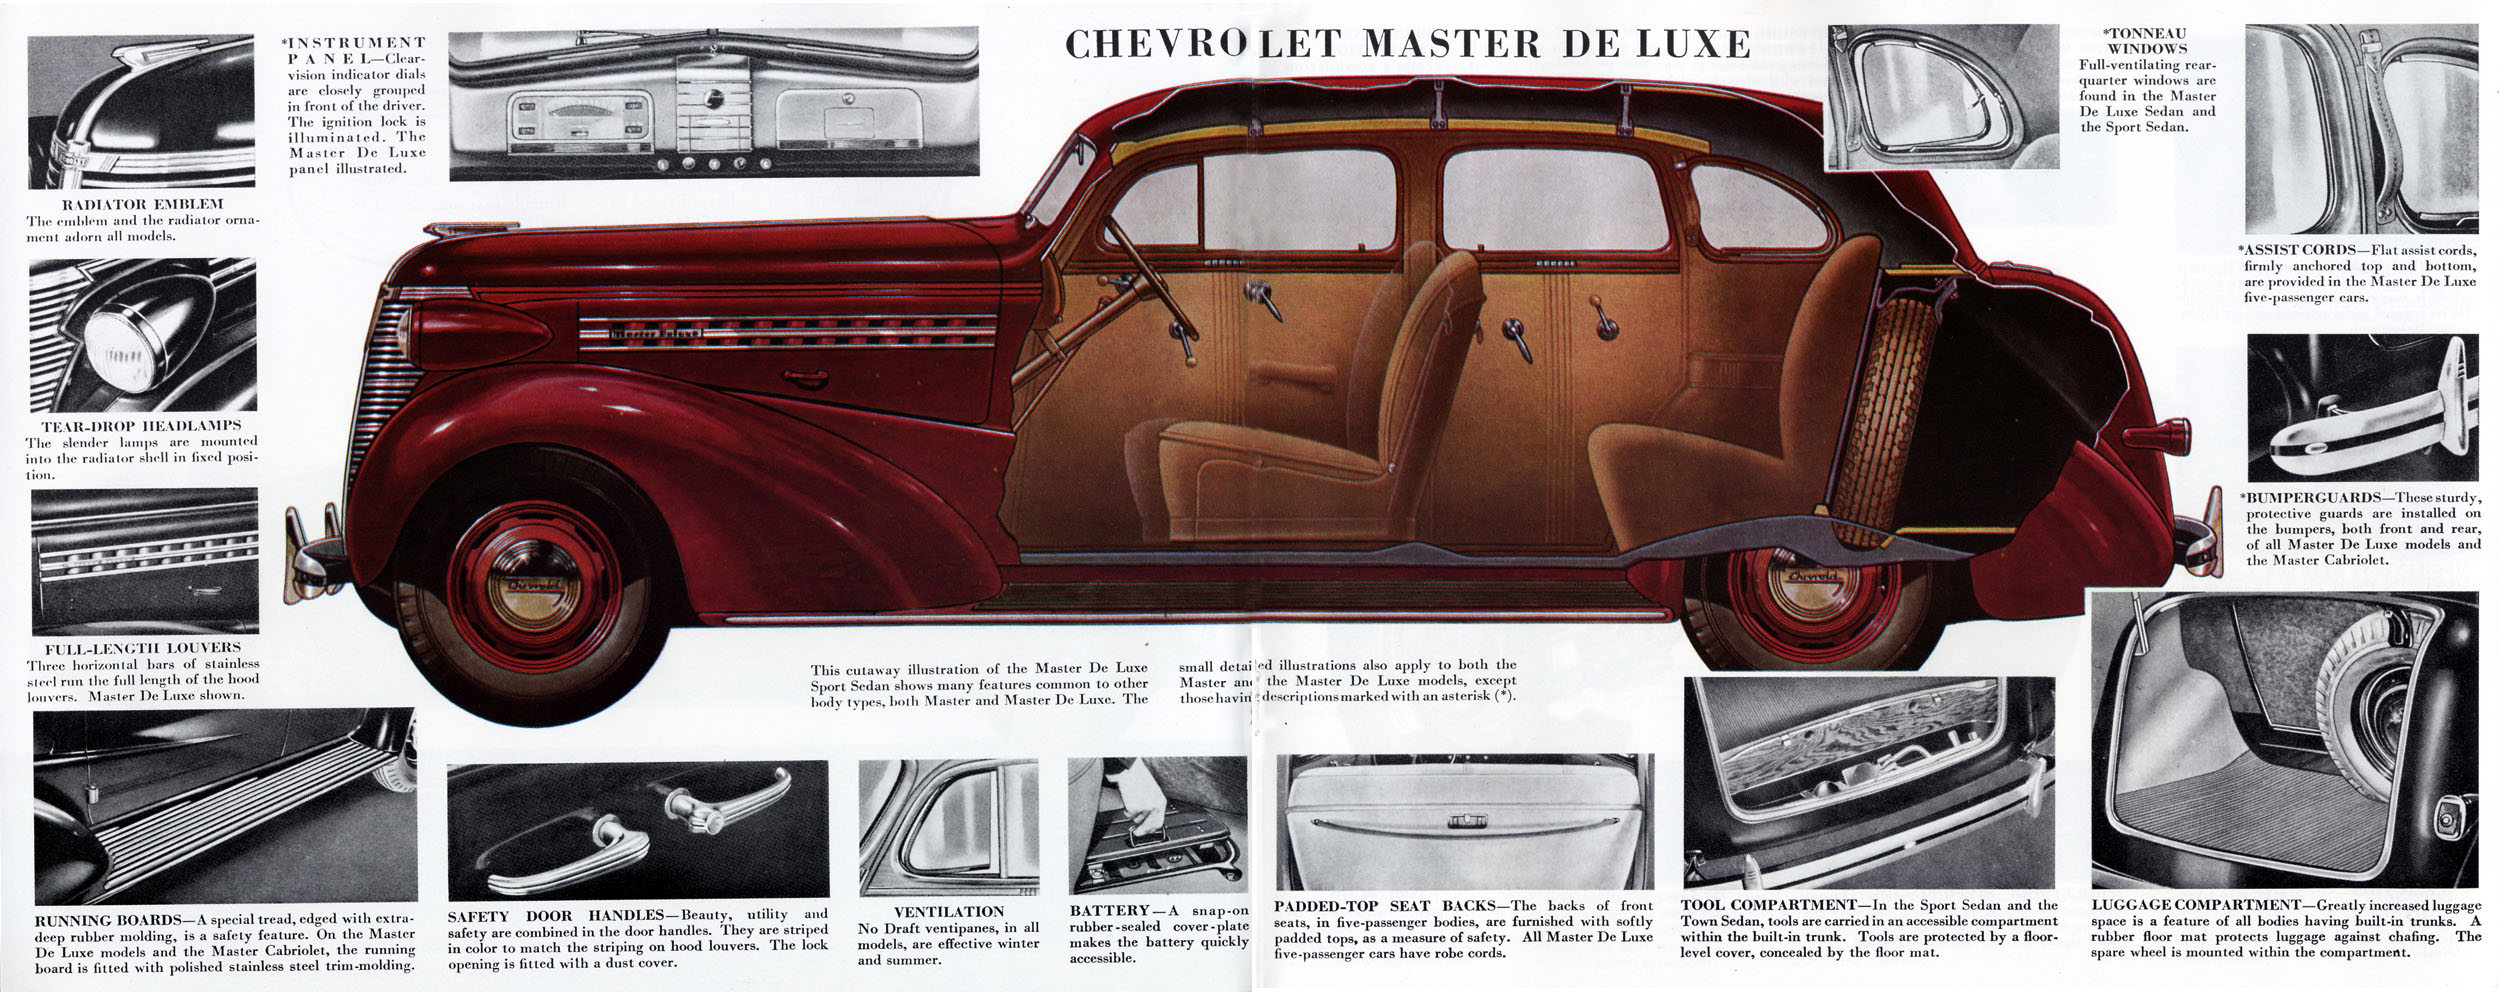 1938 Chevrolet Brochure Page 8